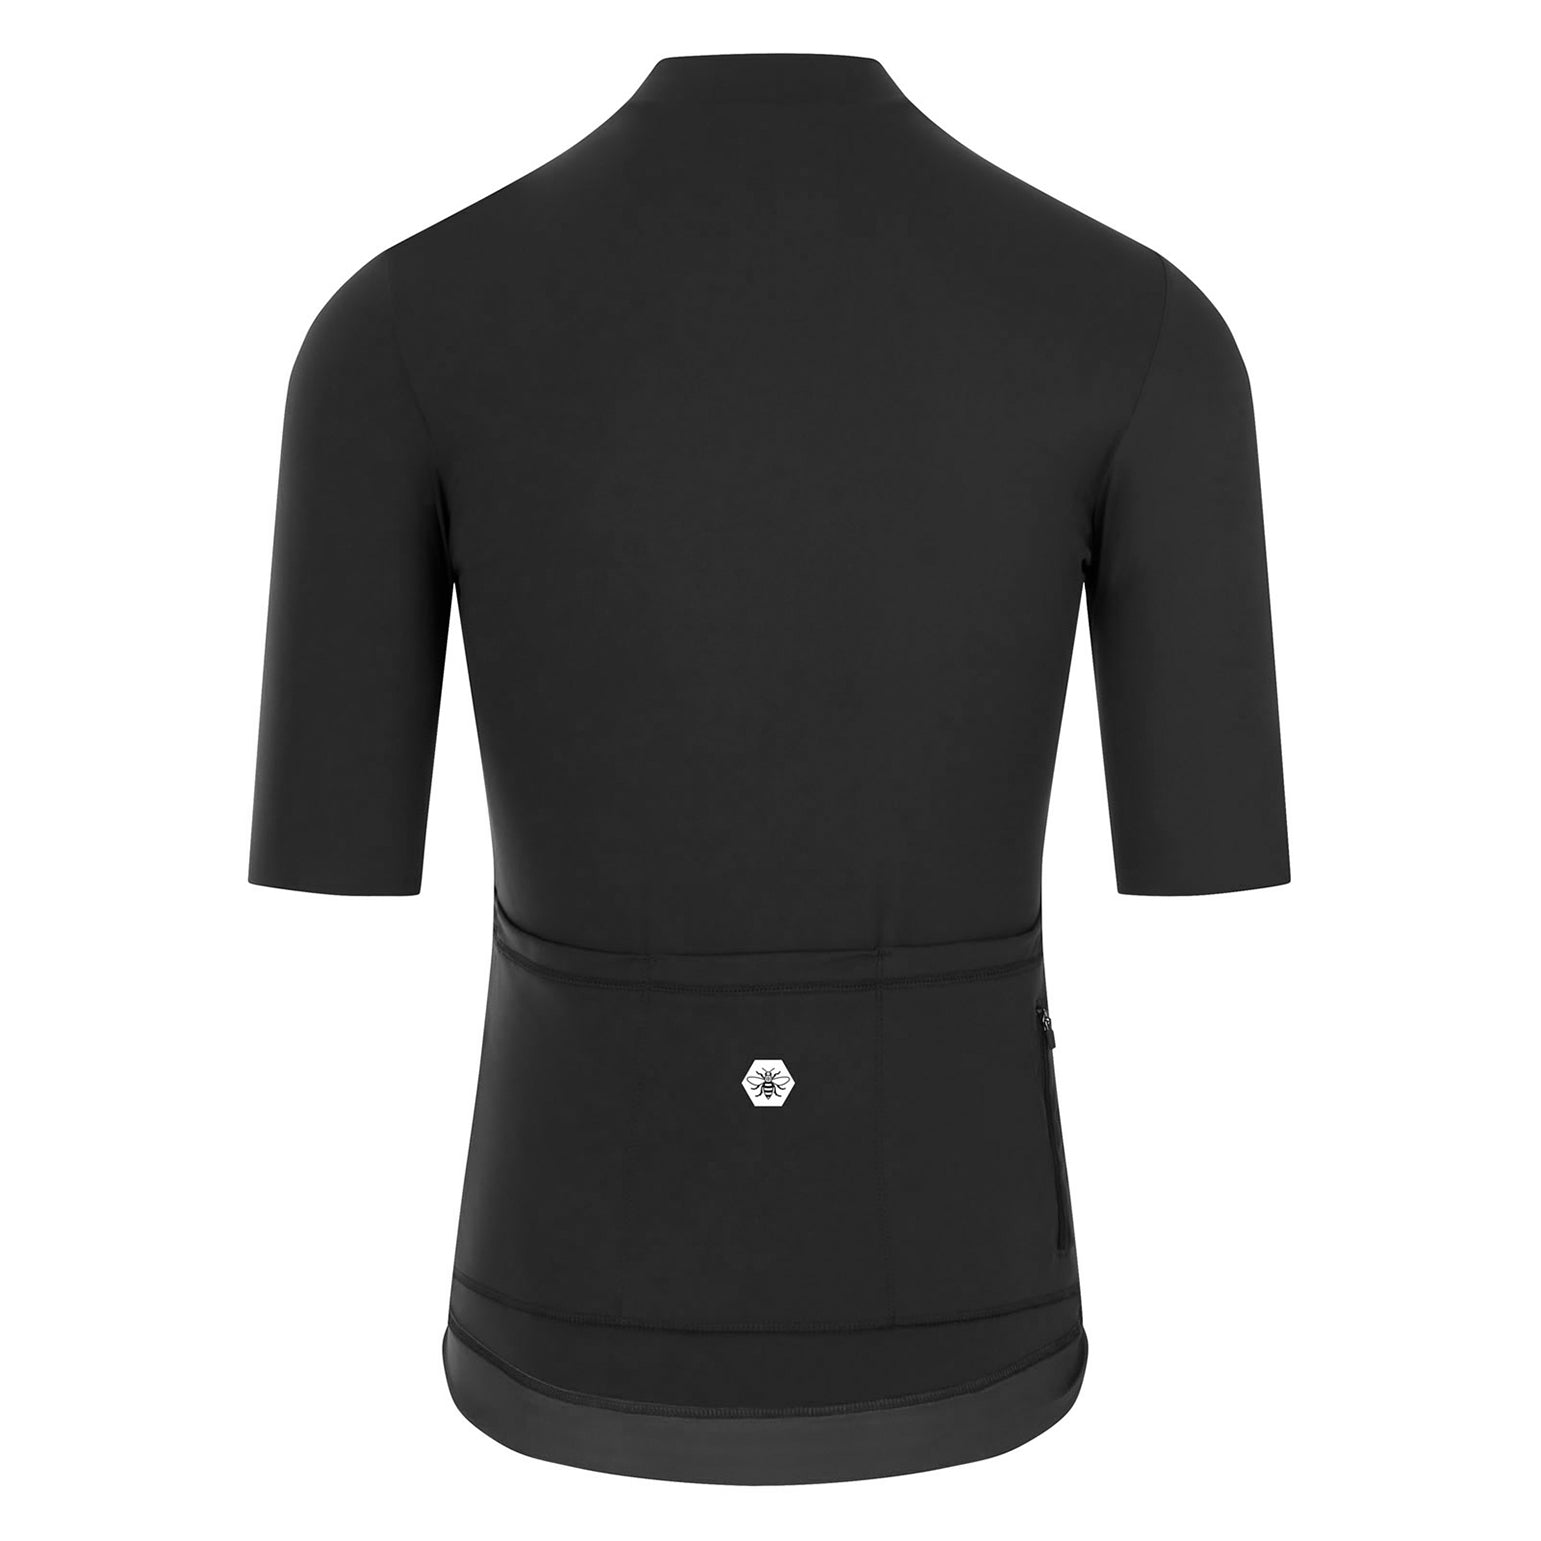 Paragon Jersey - Black - Lusso Cycle Wear